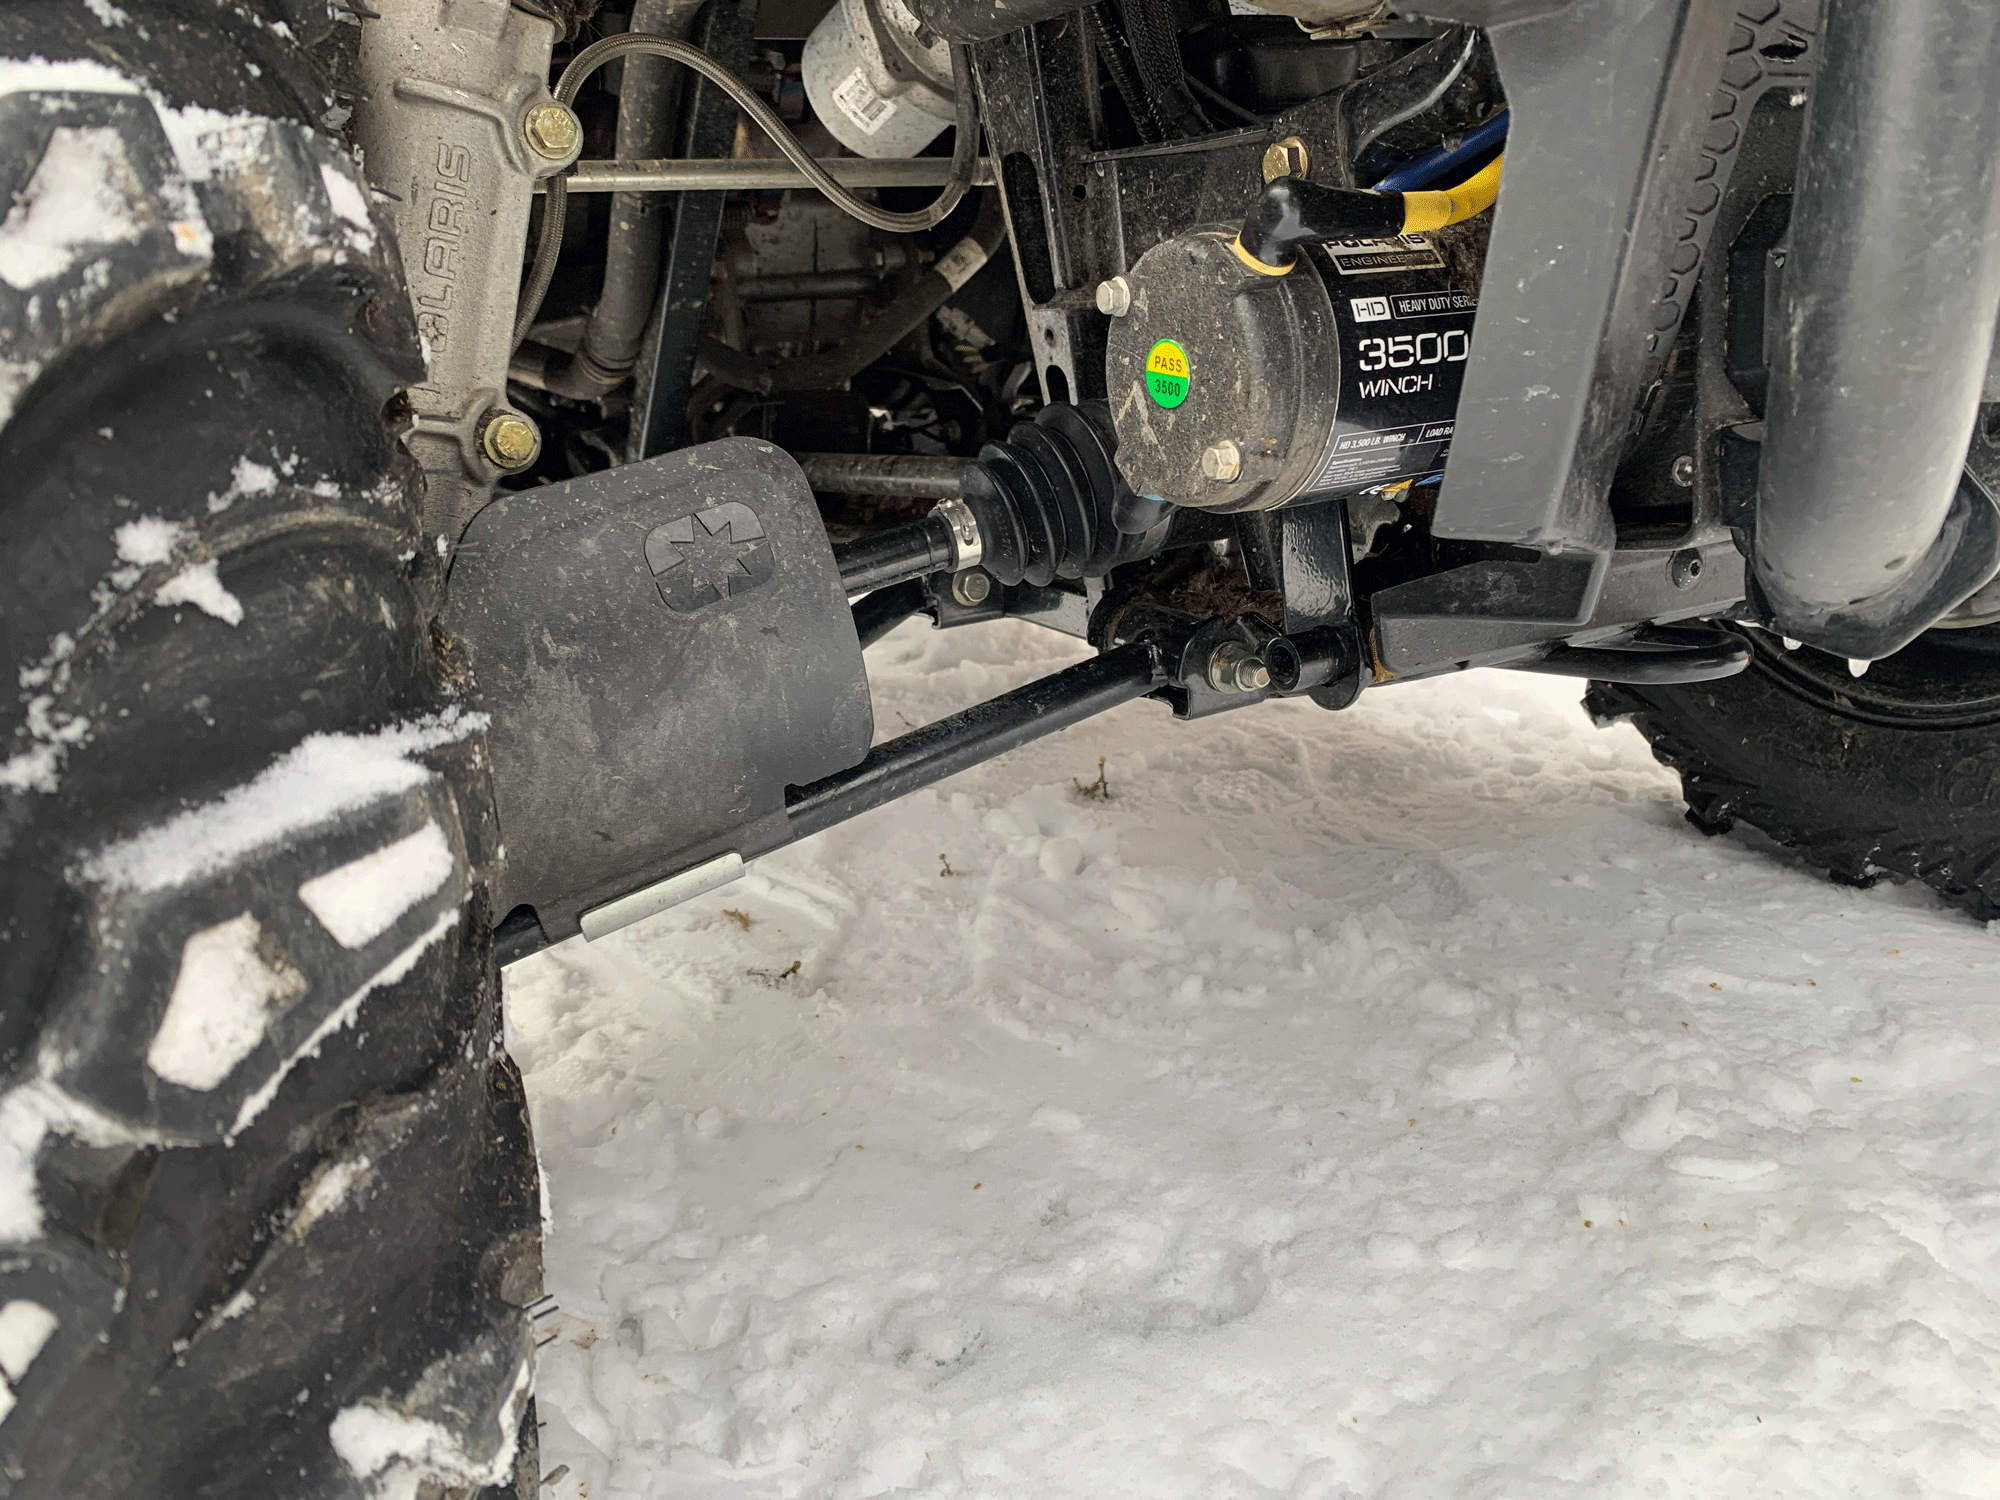 Polaris Sportsman 570 Utility with boot guards